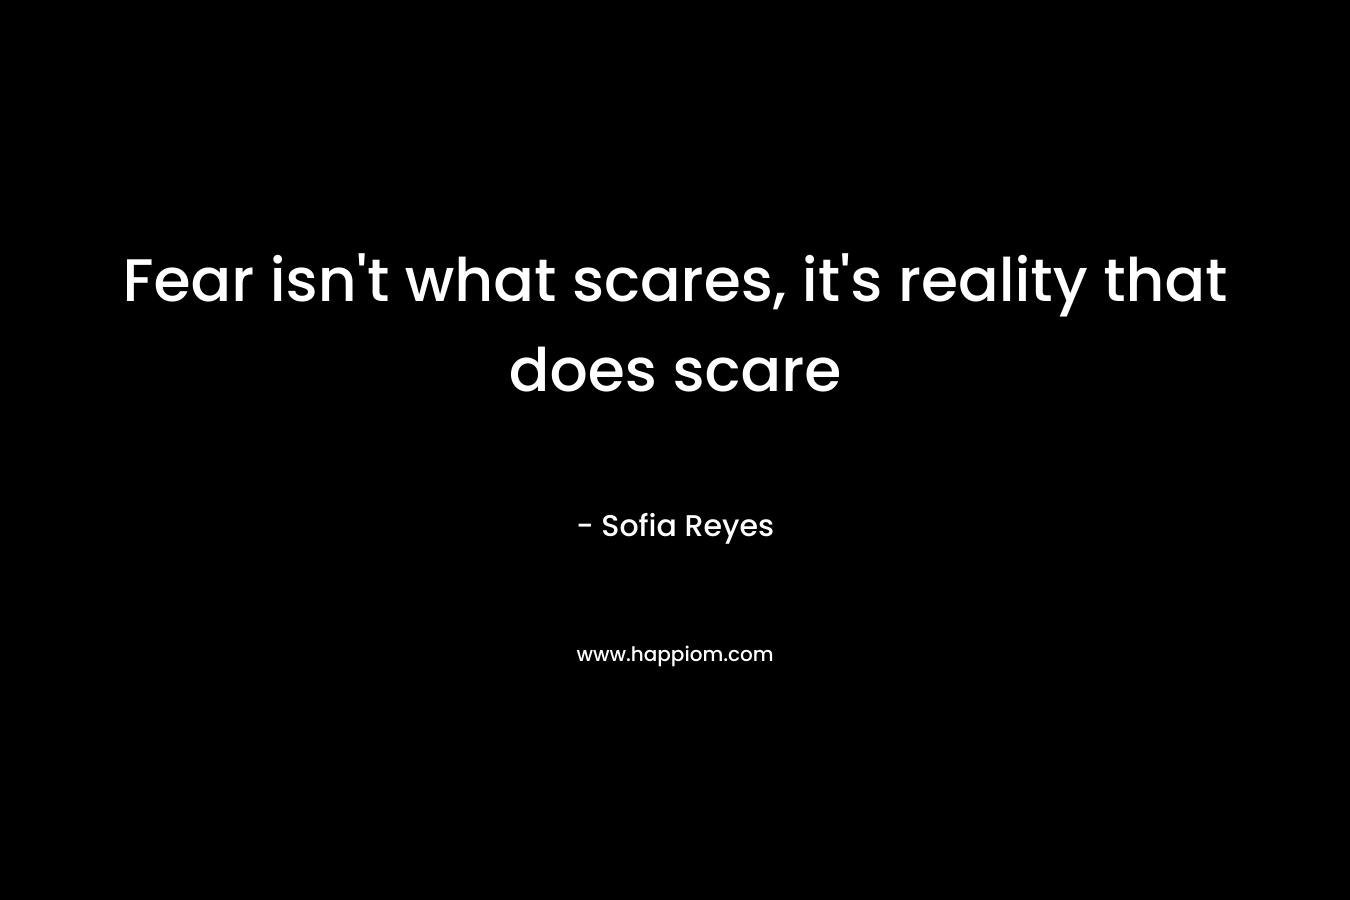 Fear isn't what scares, it's reality that does scare